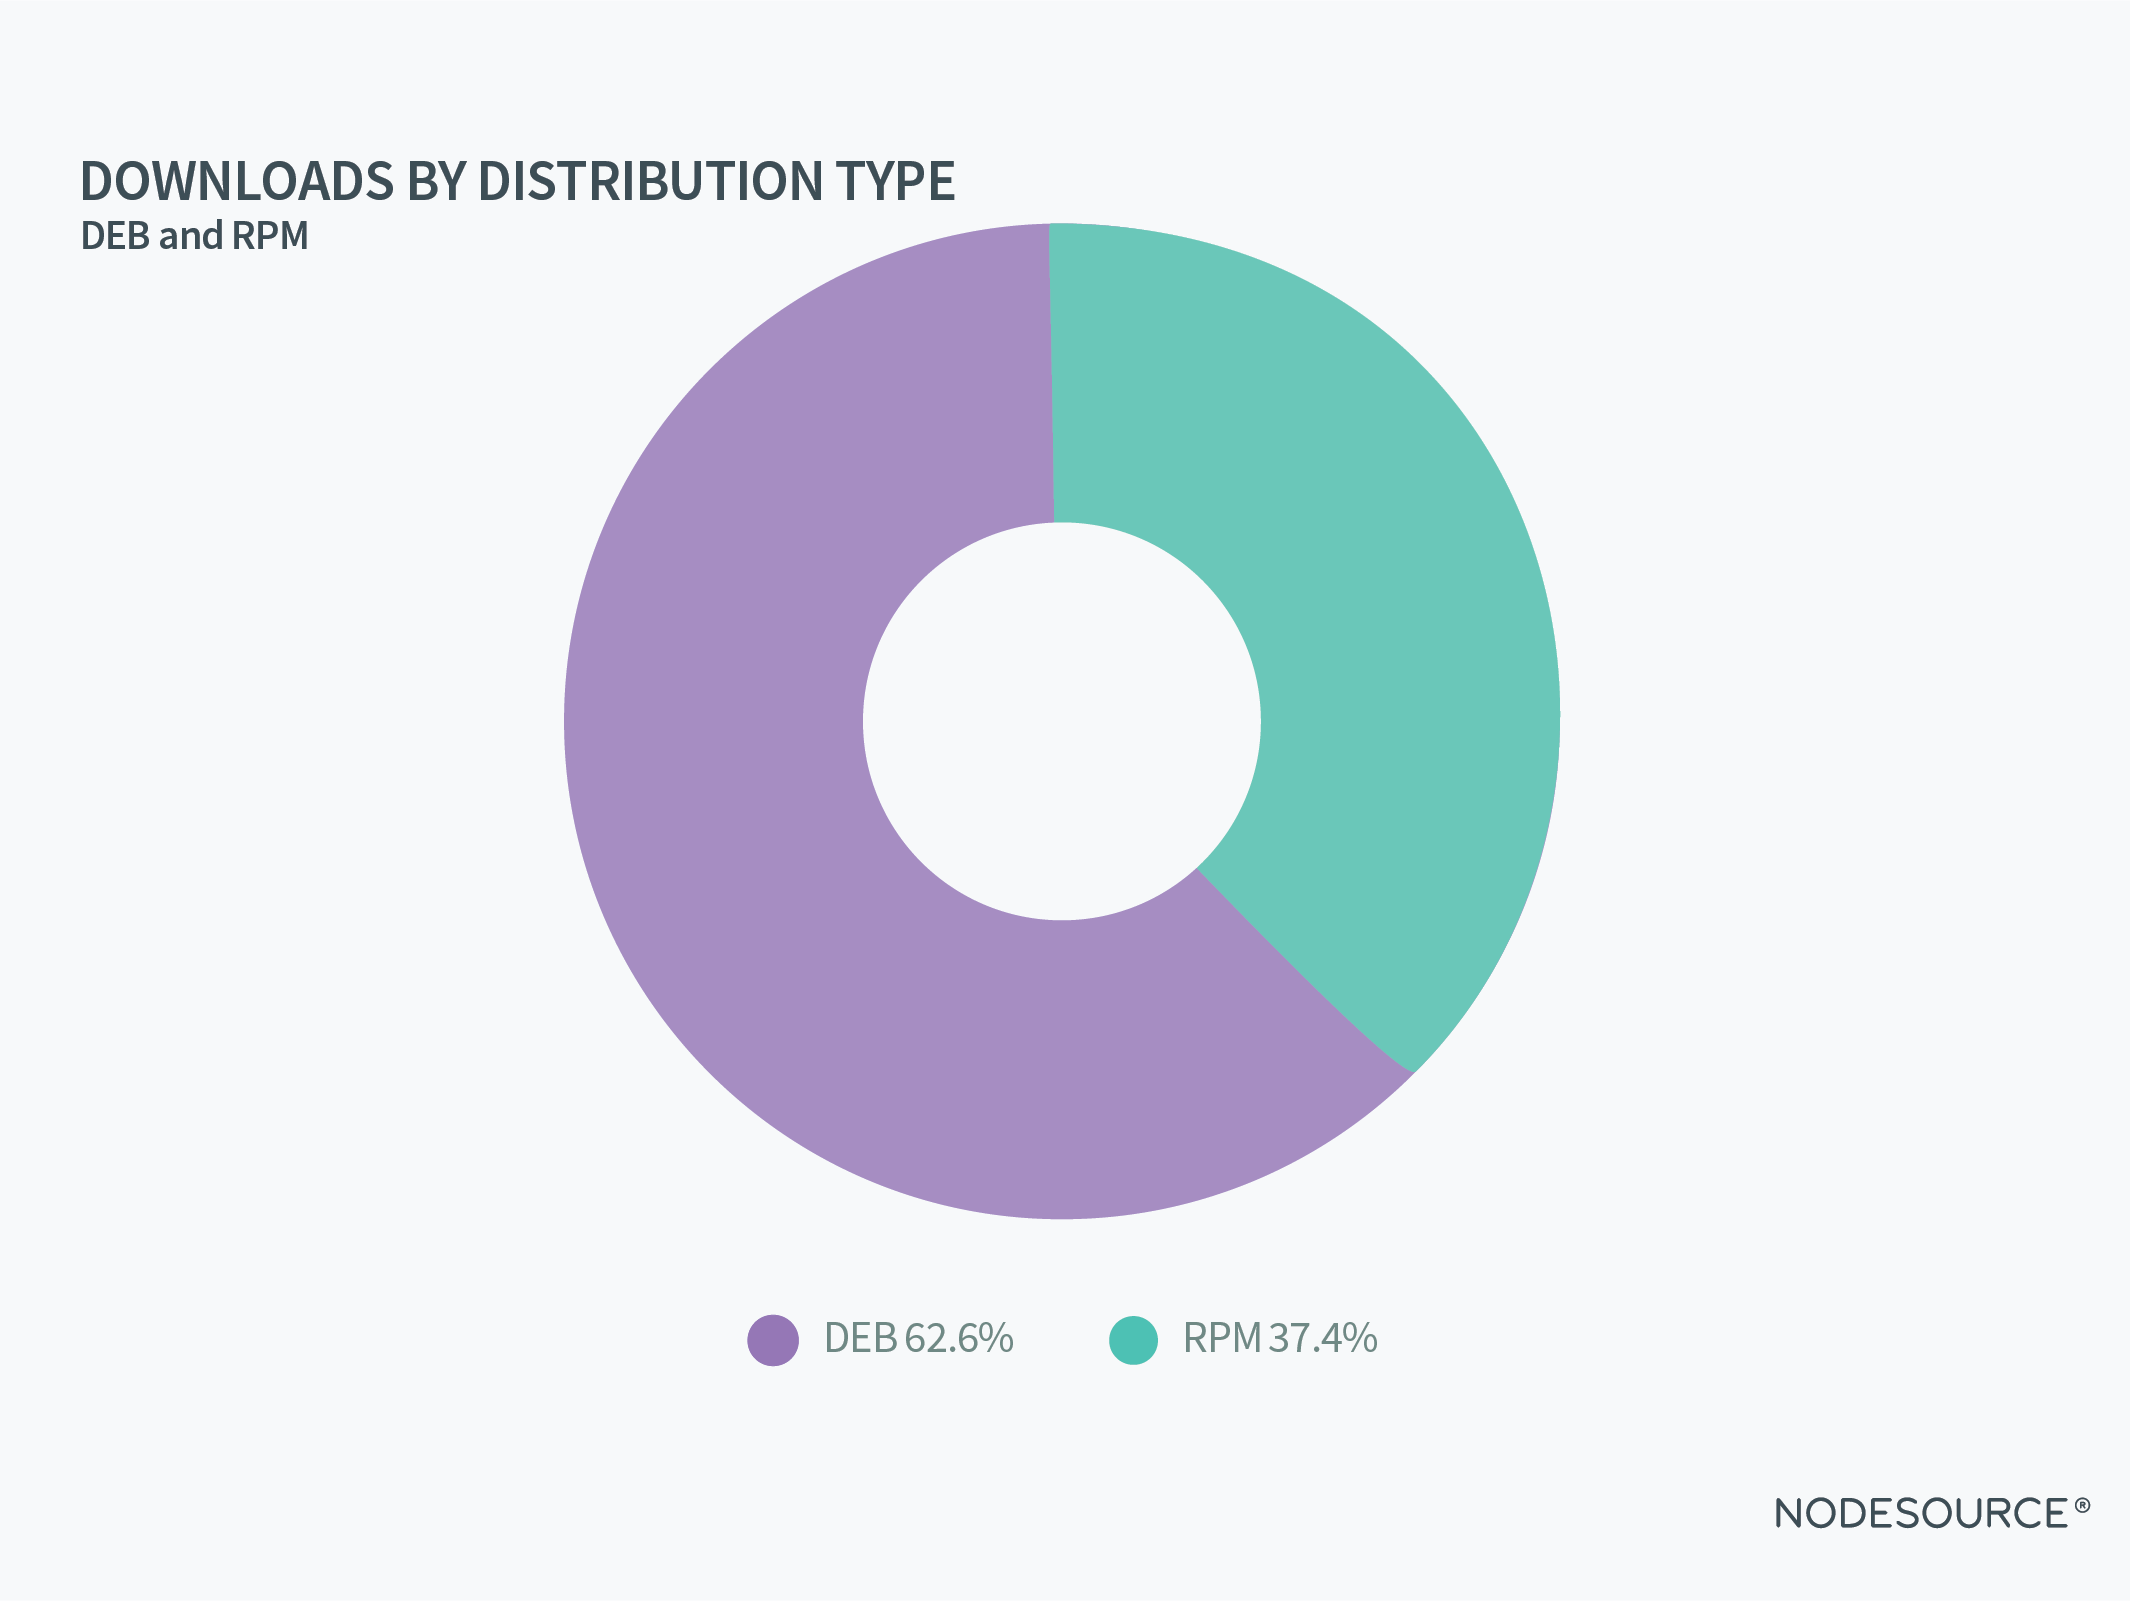 Downloads by distribution type